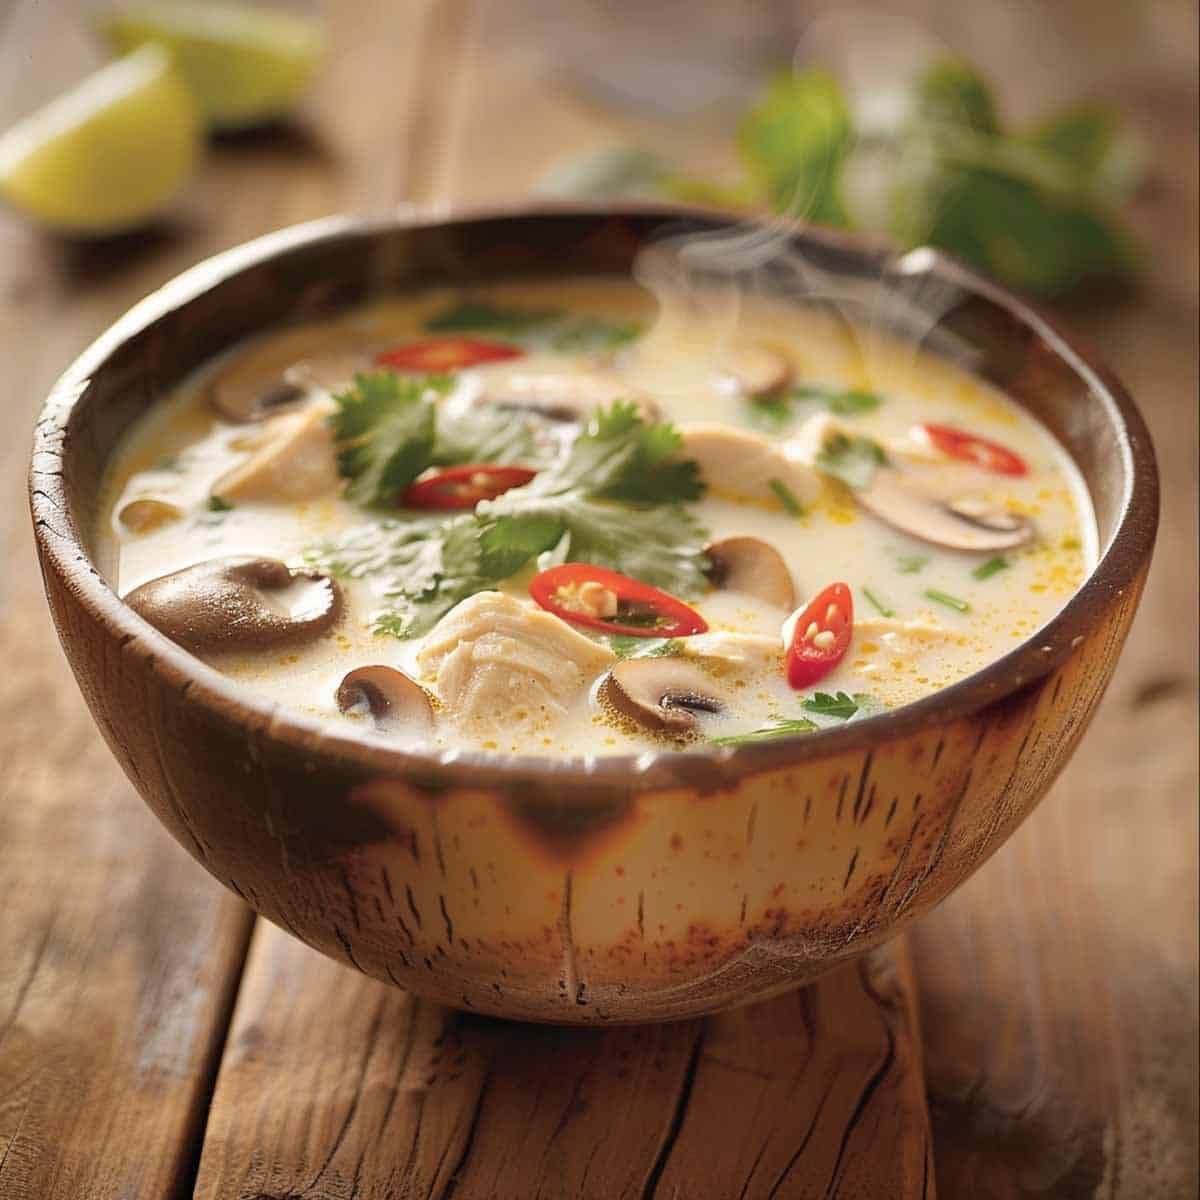 A bowl of Thai Coconut Chicken Soup (Tom Kha Gai) with creamy coconut milk, chicken, mushrooms, and fresh herbs